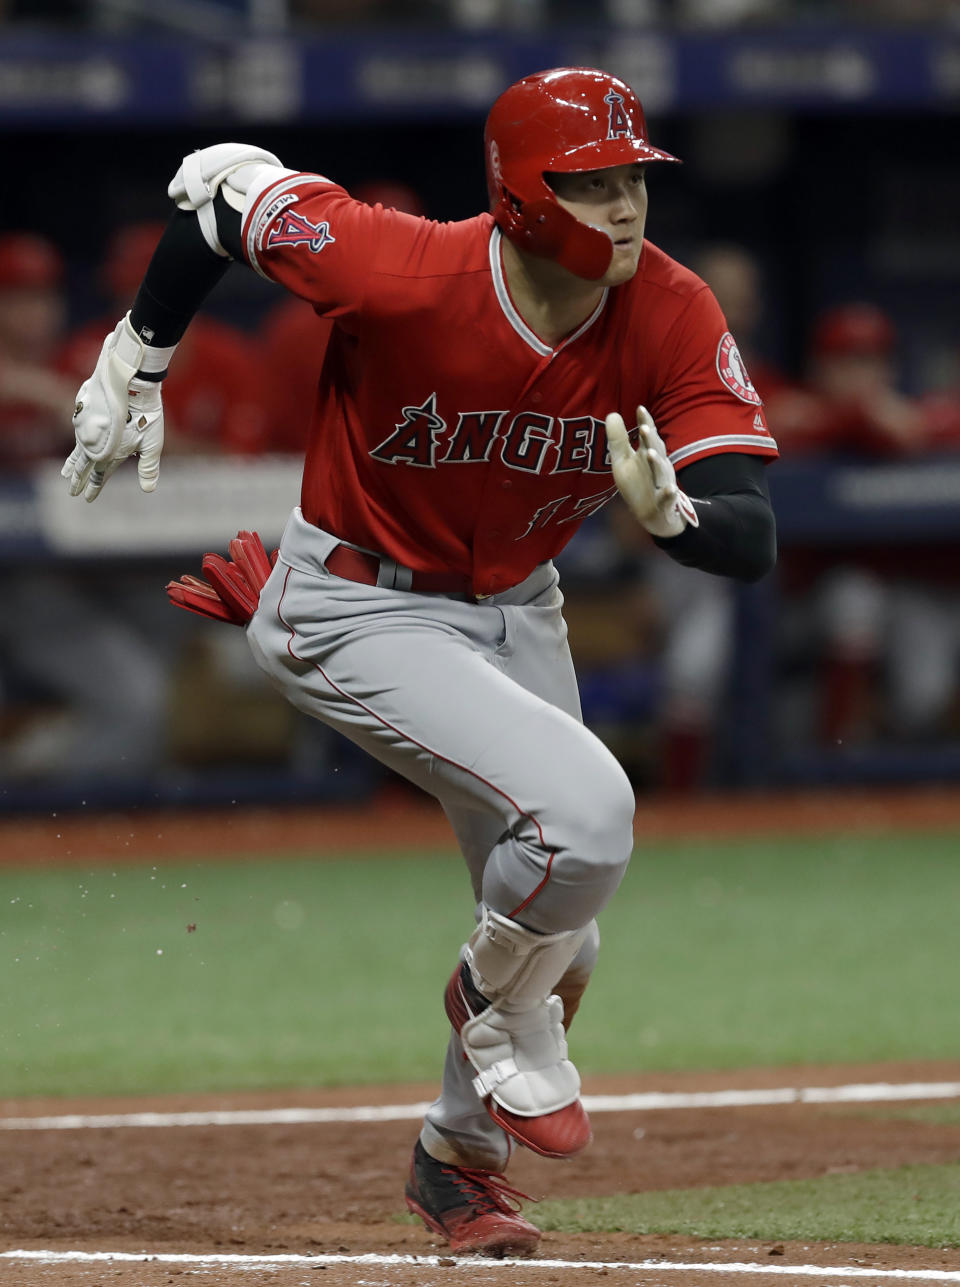 Los Angeles Angels' Shohei Ohtani, of Japan, runs to first with a triple off Tampa Bay Rays' Ryan Yarbrough during the fifth inning of a baseball game Thursday, June 13, 2019, in St. Petersburg, Fla. (AP Photo/Chris O'Meara)